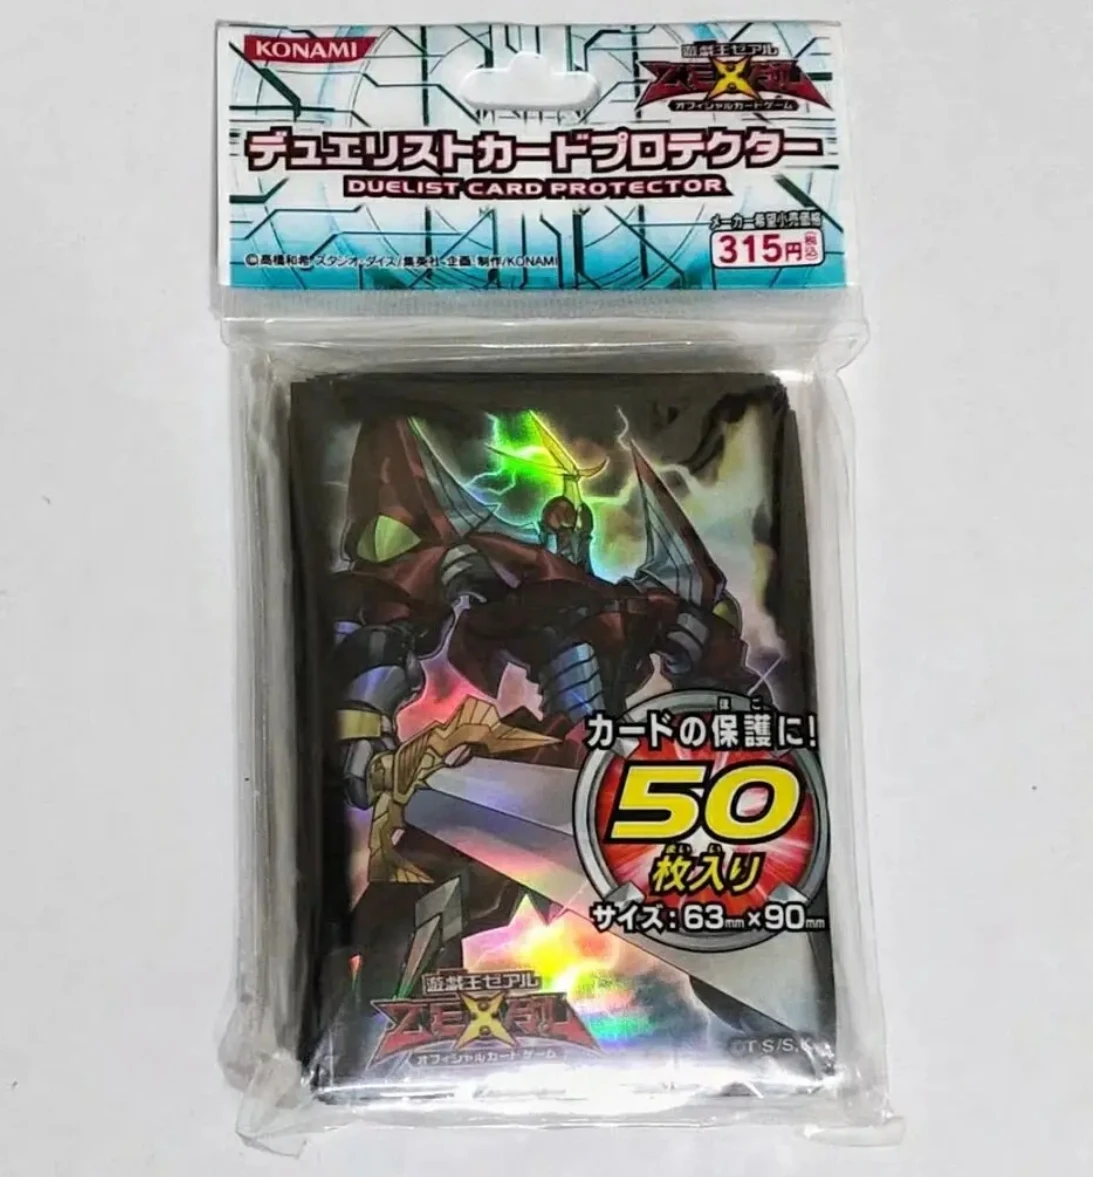 

50Pcs Yugioh KONAMI Duel Monsters Heroic Champion - Excalibur Official Collection Sealed Duelist Card Protector Sleeves